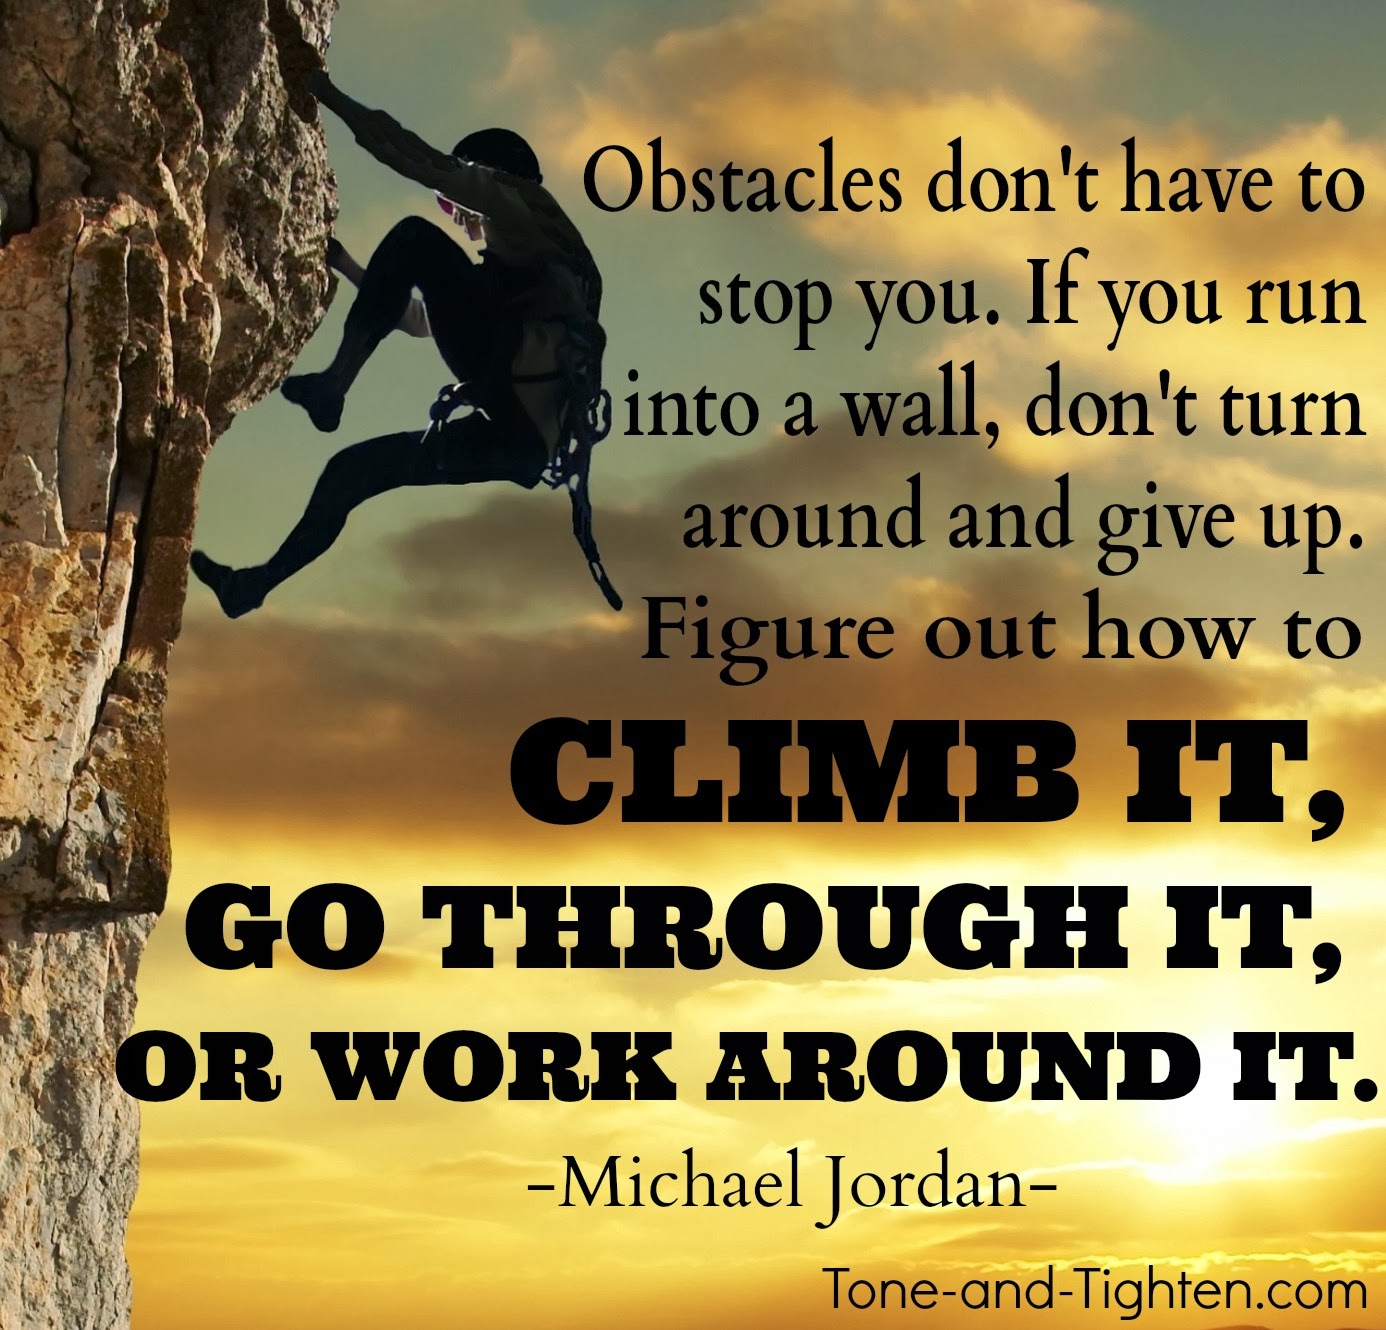 Amazing Obstacles In Life Quotes in the world Check it out now ...